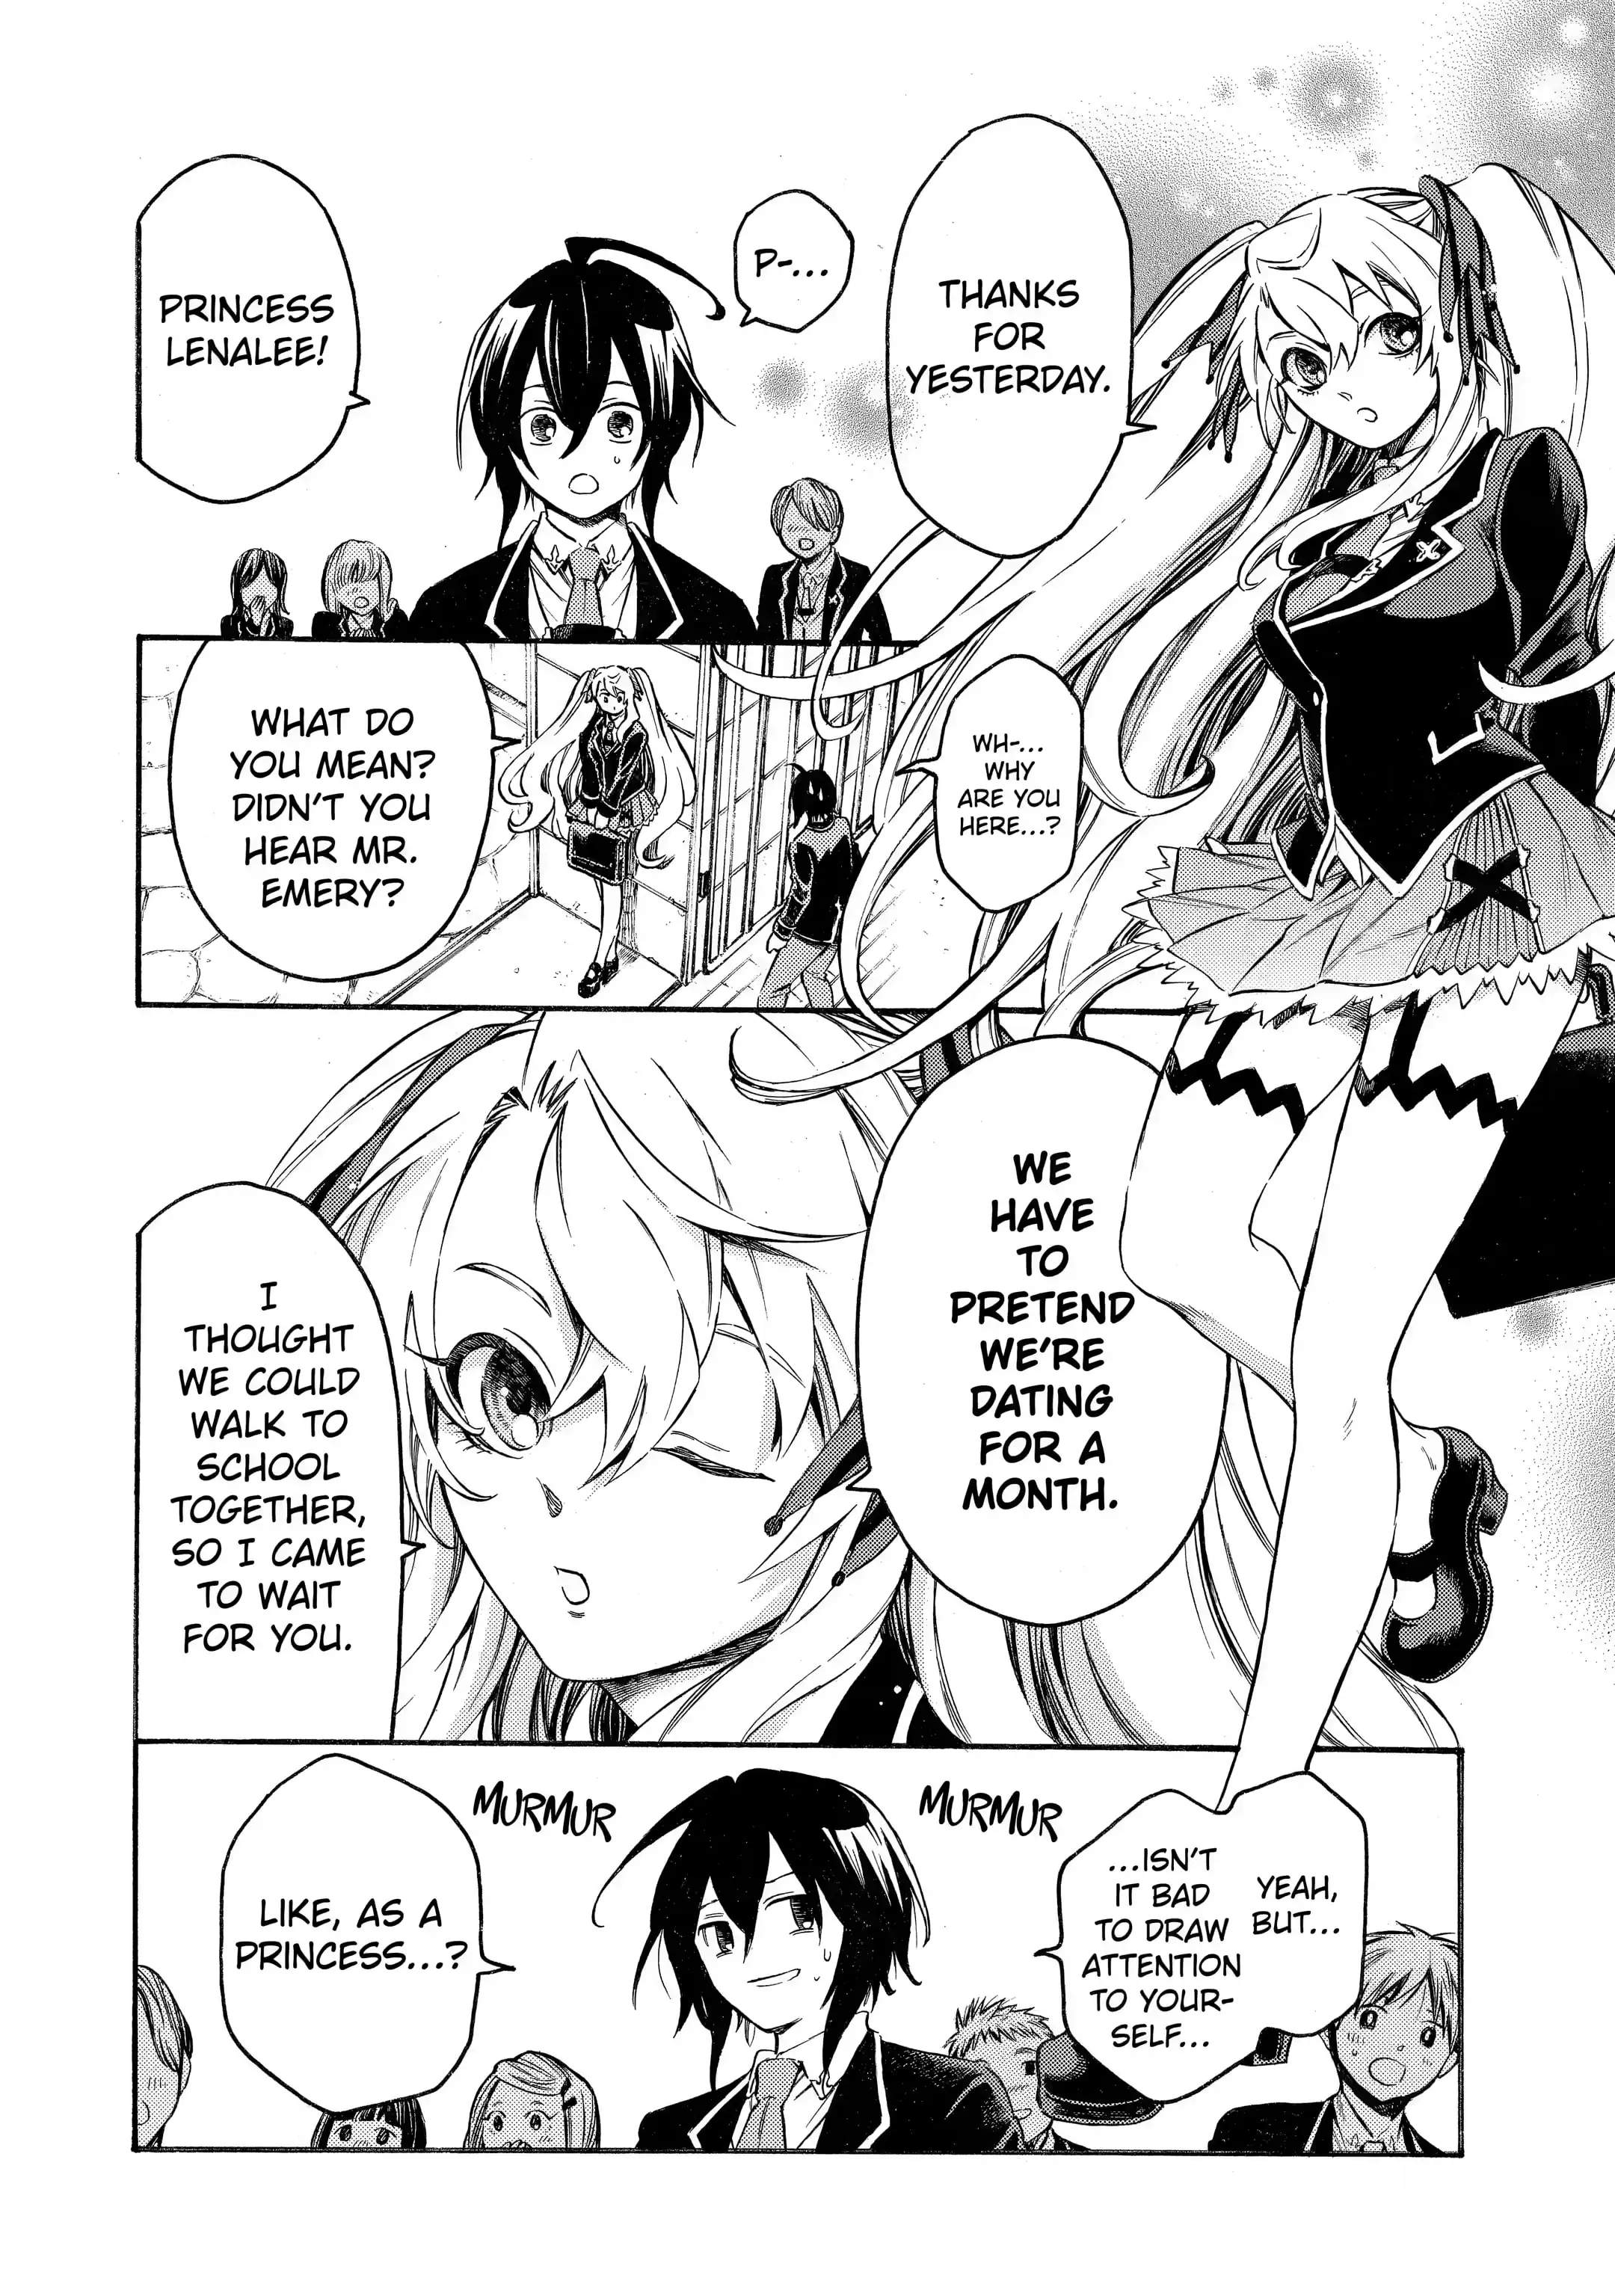 Reincarnation of the Unrivalled Time Mage: The Underachiever at the Magic Academy Turns Out to Be the Strongest Mage Who Controls Time! Chapter 3.1-eng-li - Page 3